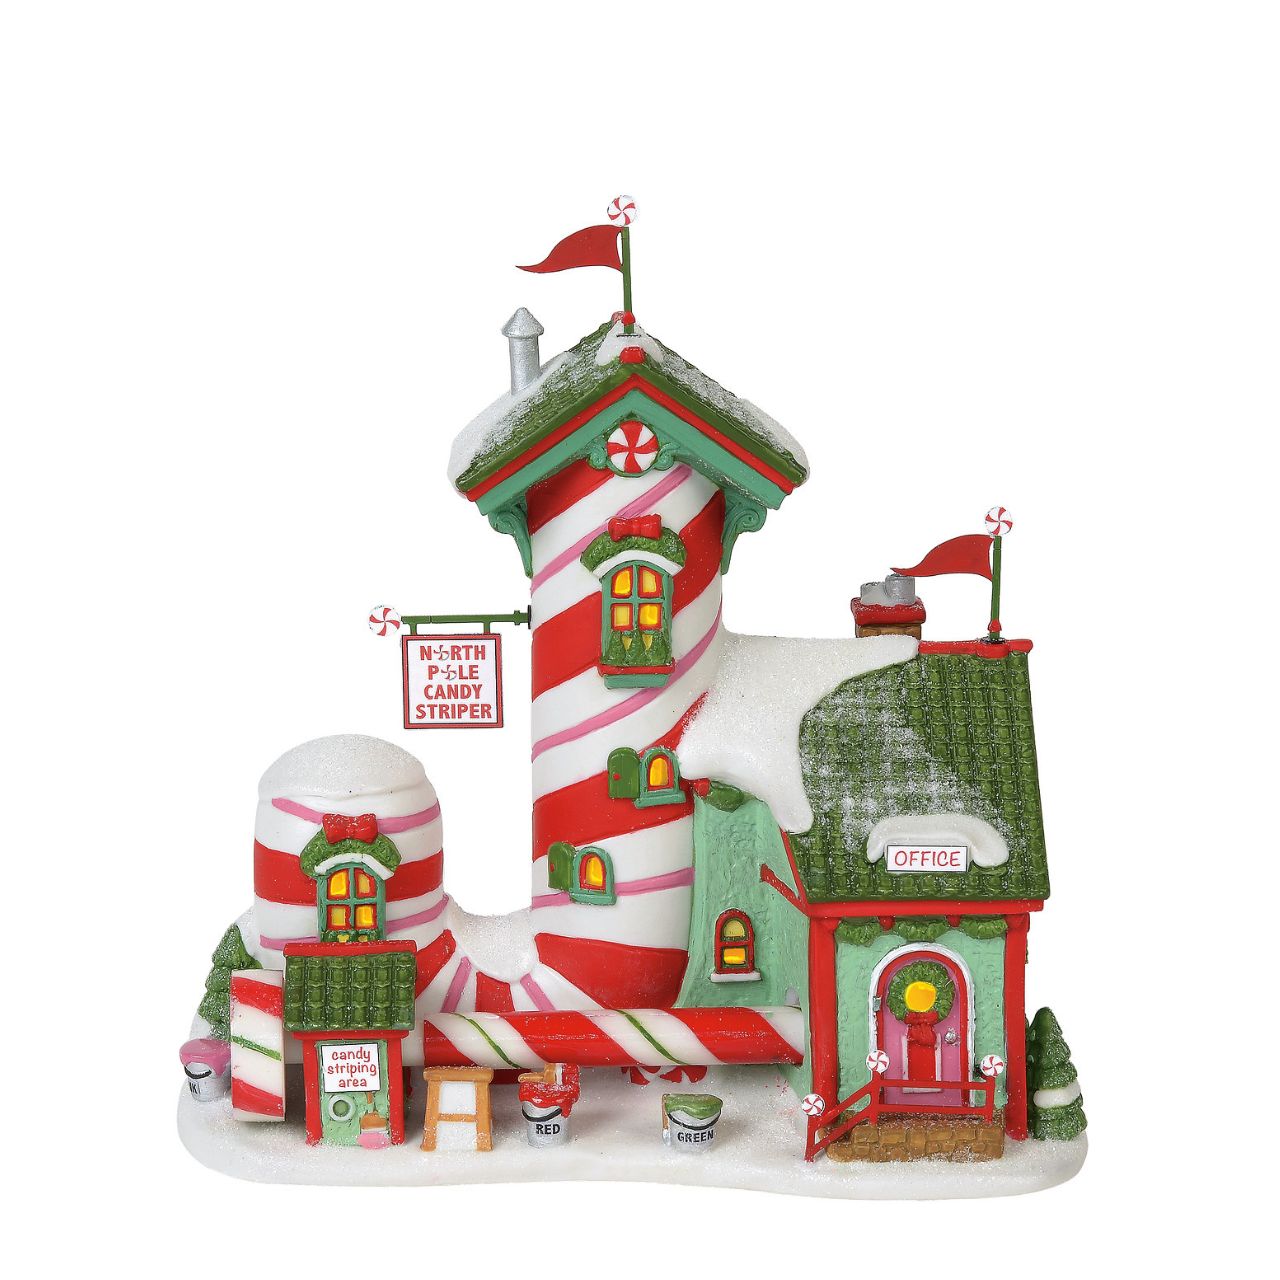 Department 56 North Pole Candy Striper  If you have ever wondered how candy canes get their stripes, this whimsical factory at the North Pole reveals the trade secrets. The tiny stool in front offers industrious elves the chance to add creative stripes to a freshly made rotating candy stick